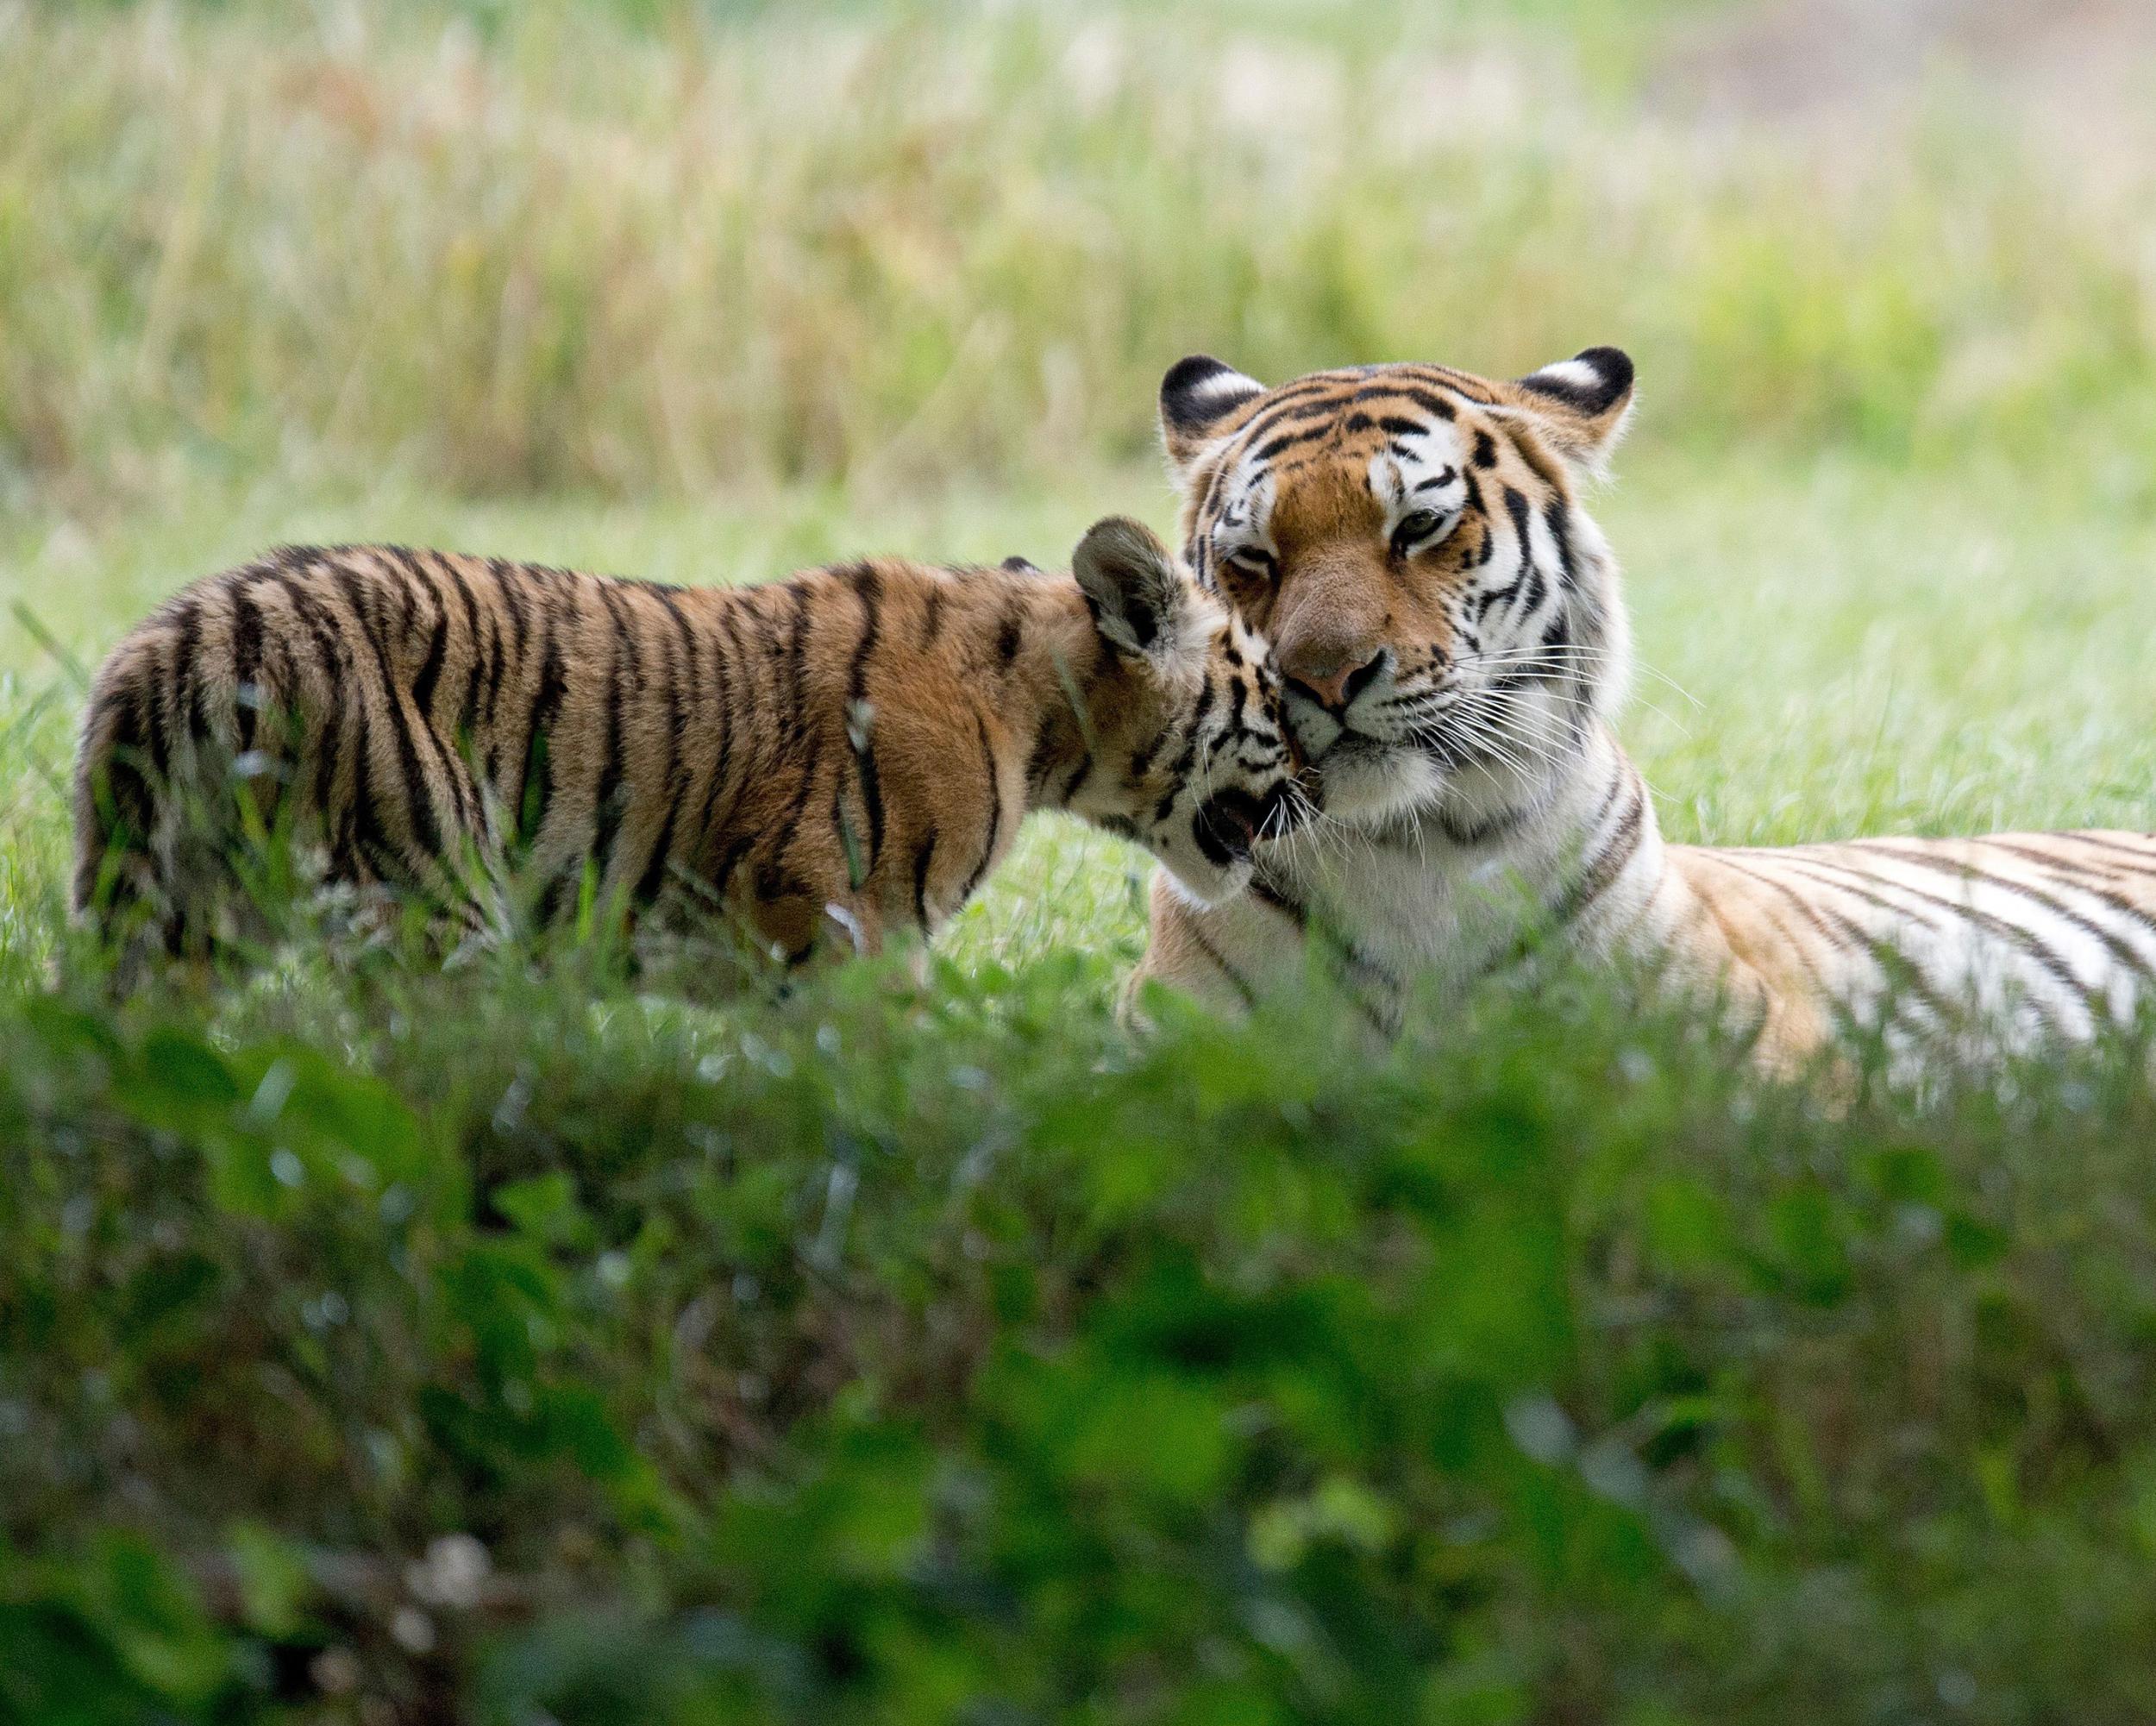 Strong scents keep the tigers' sense of smell stimulated